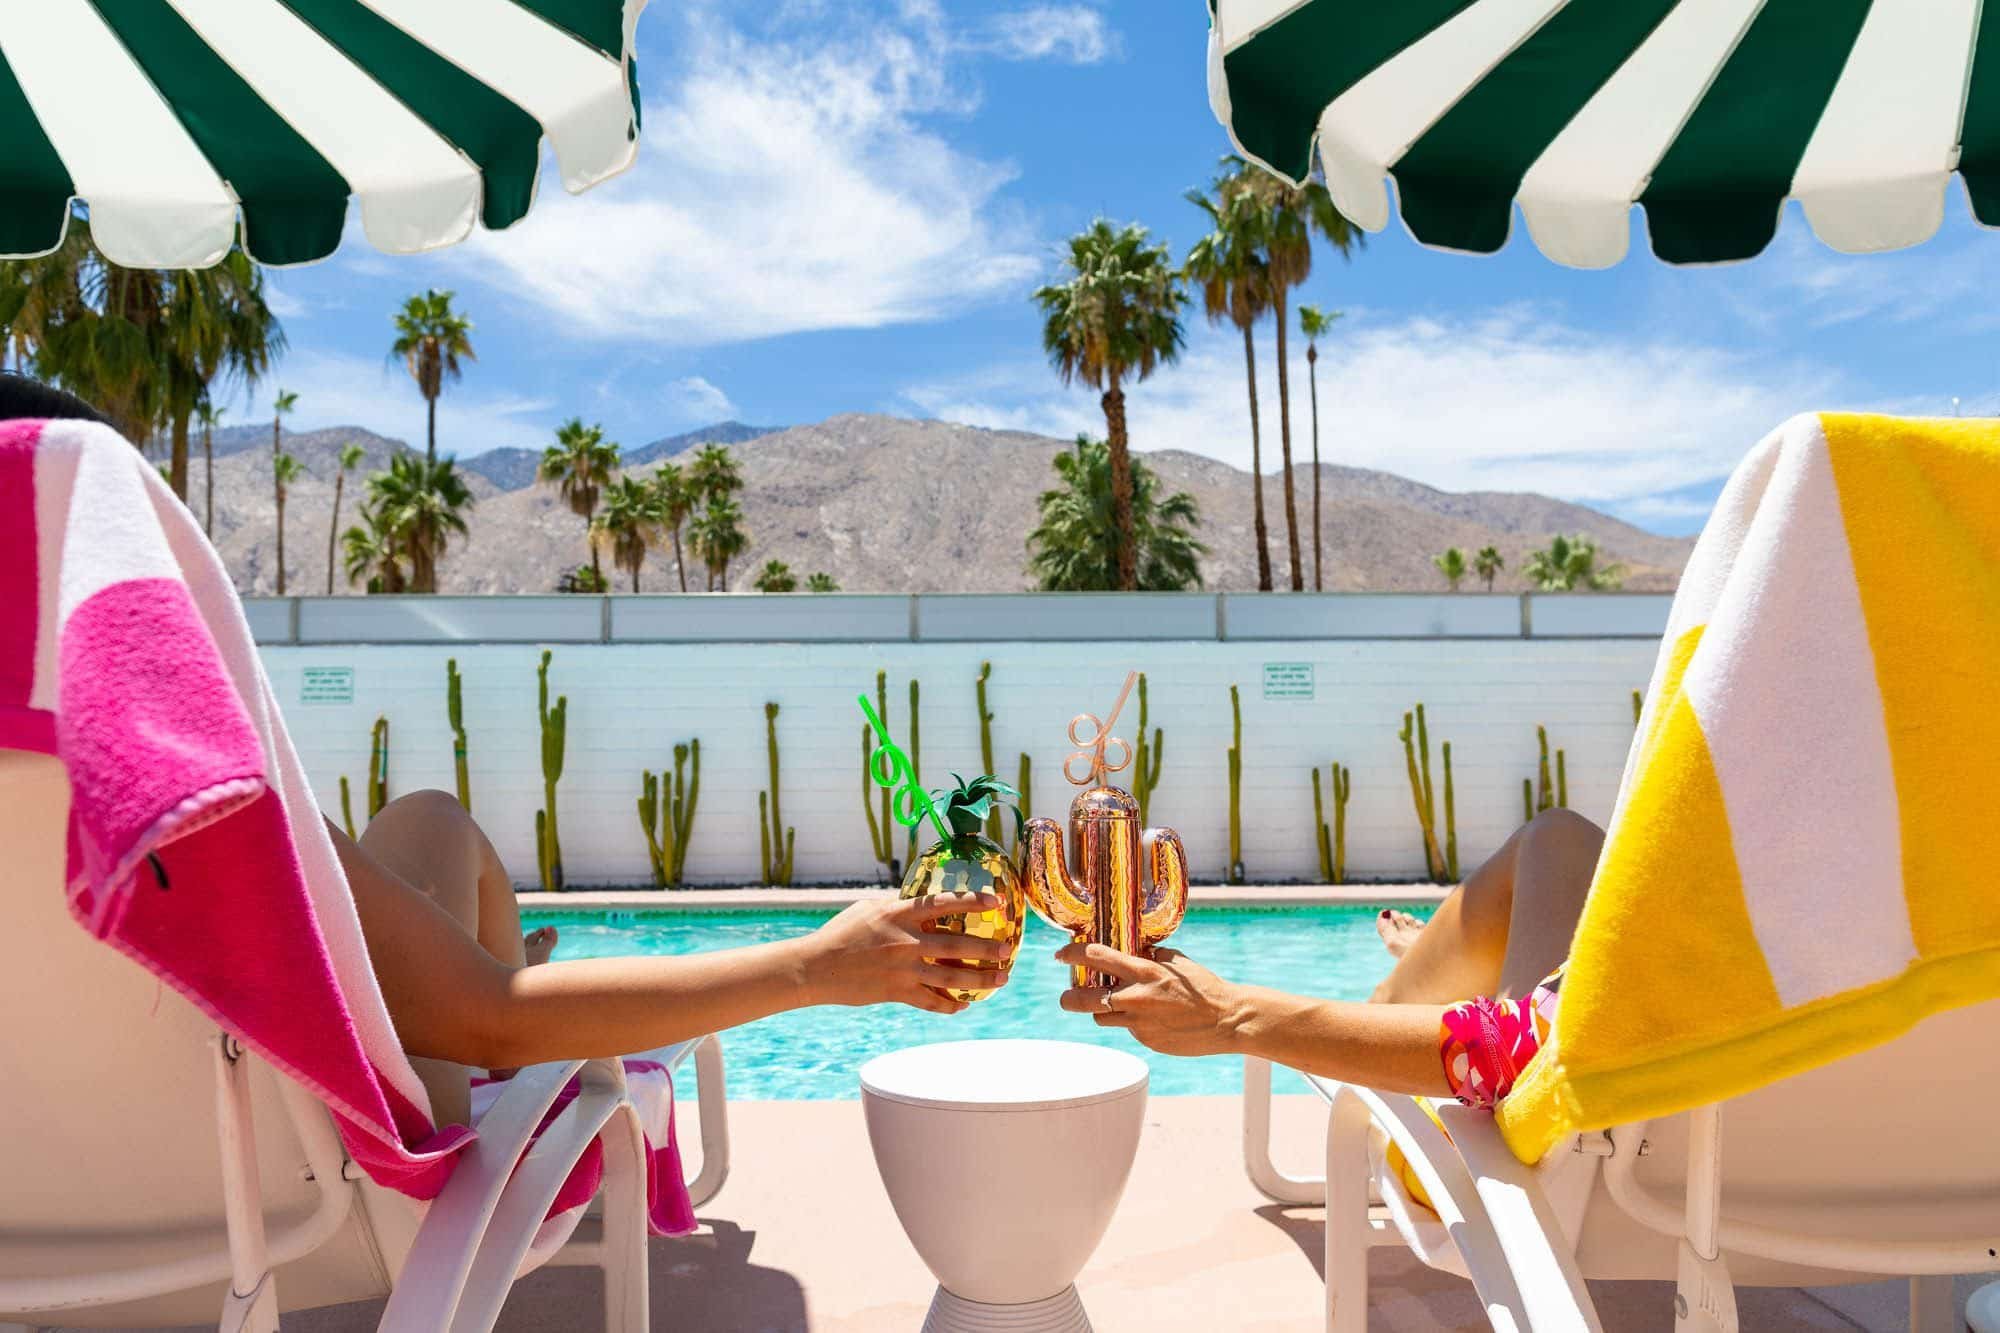 The Top 5 Reasons to Visit Palm Springs, California Now